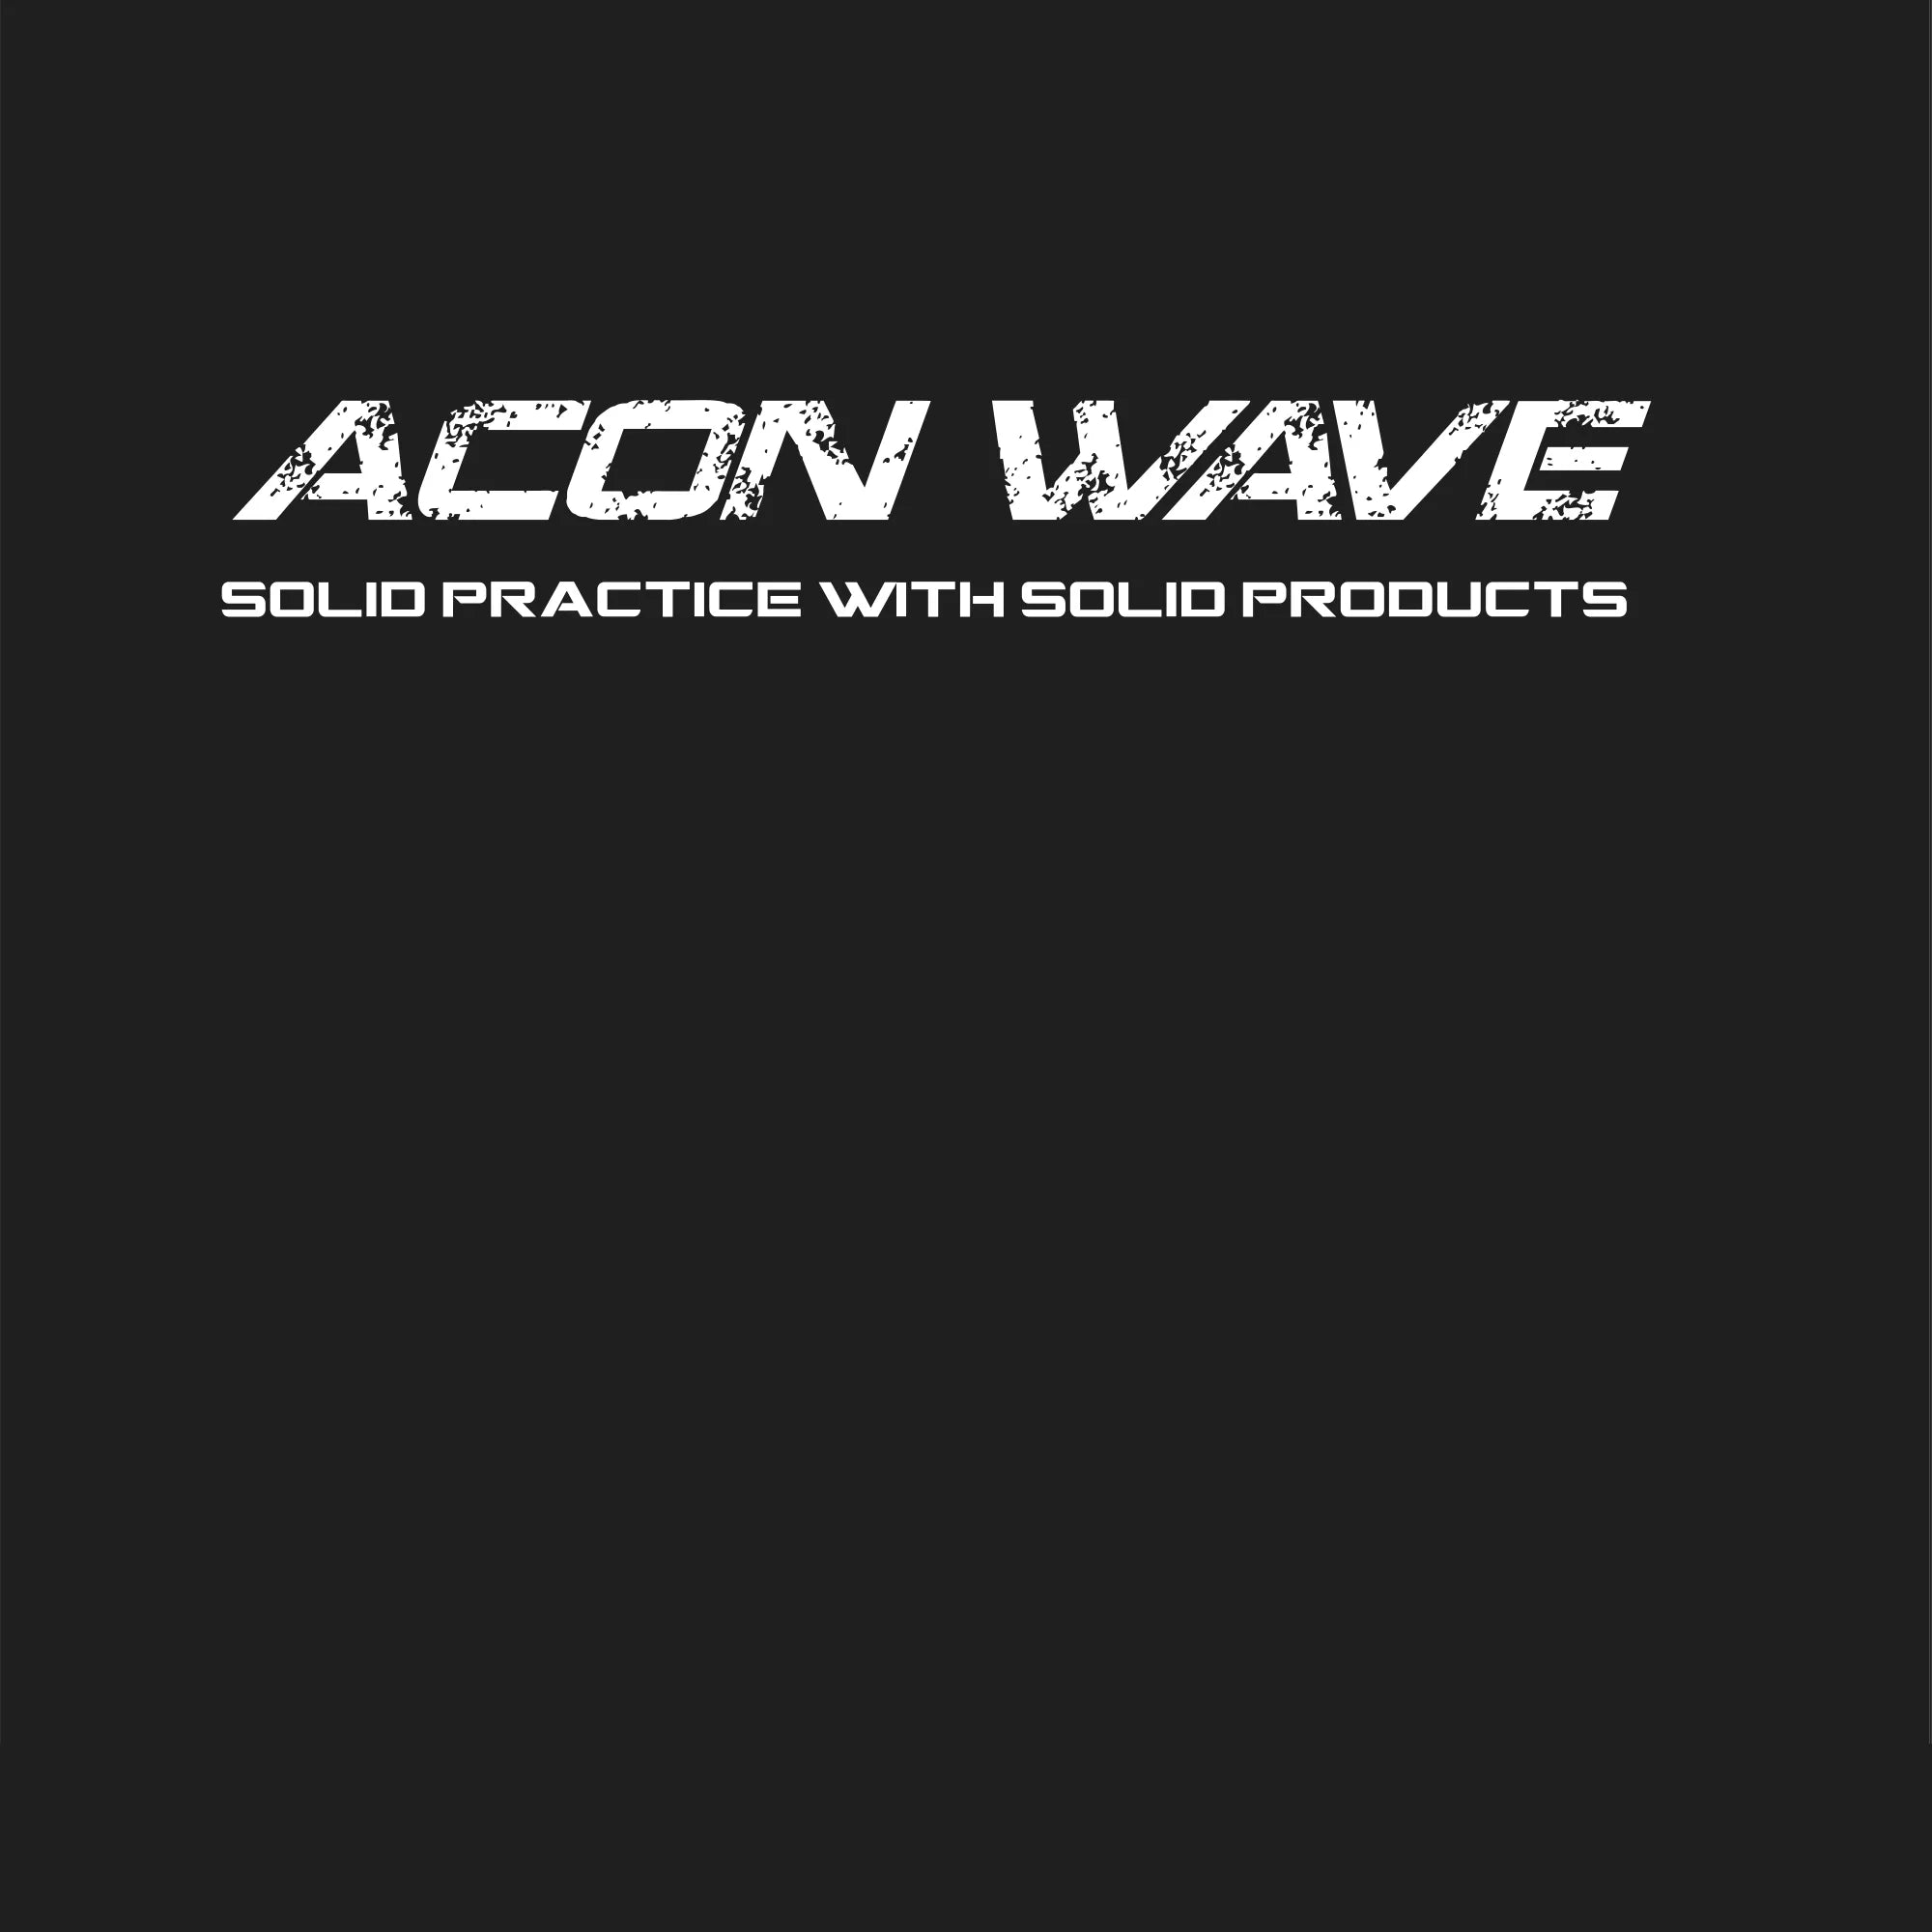 ACON WAVE Solid Pracice with Solid Products.